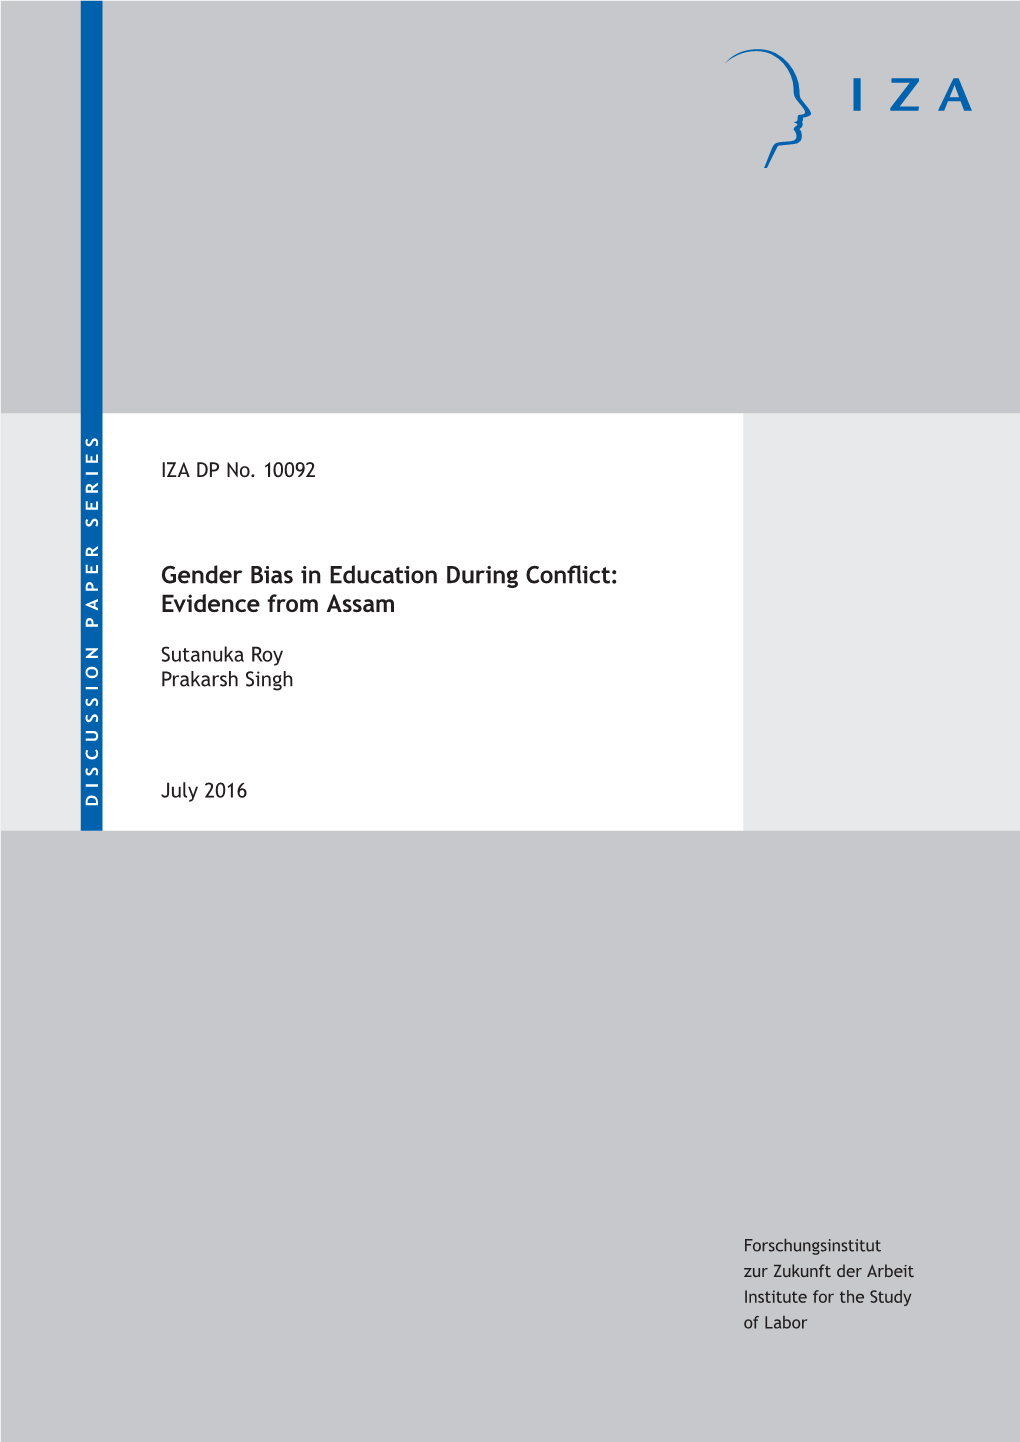 Gender Bias in Education During Conflict: Evidence from Assam